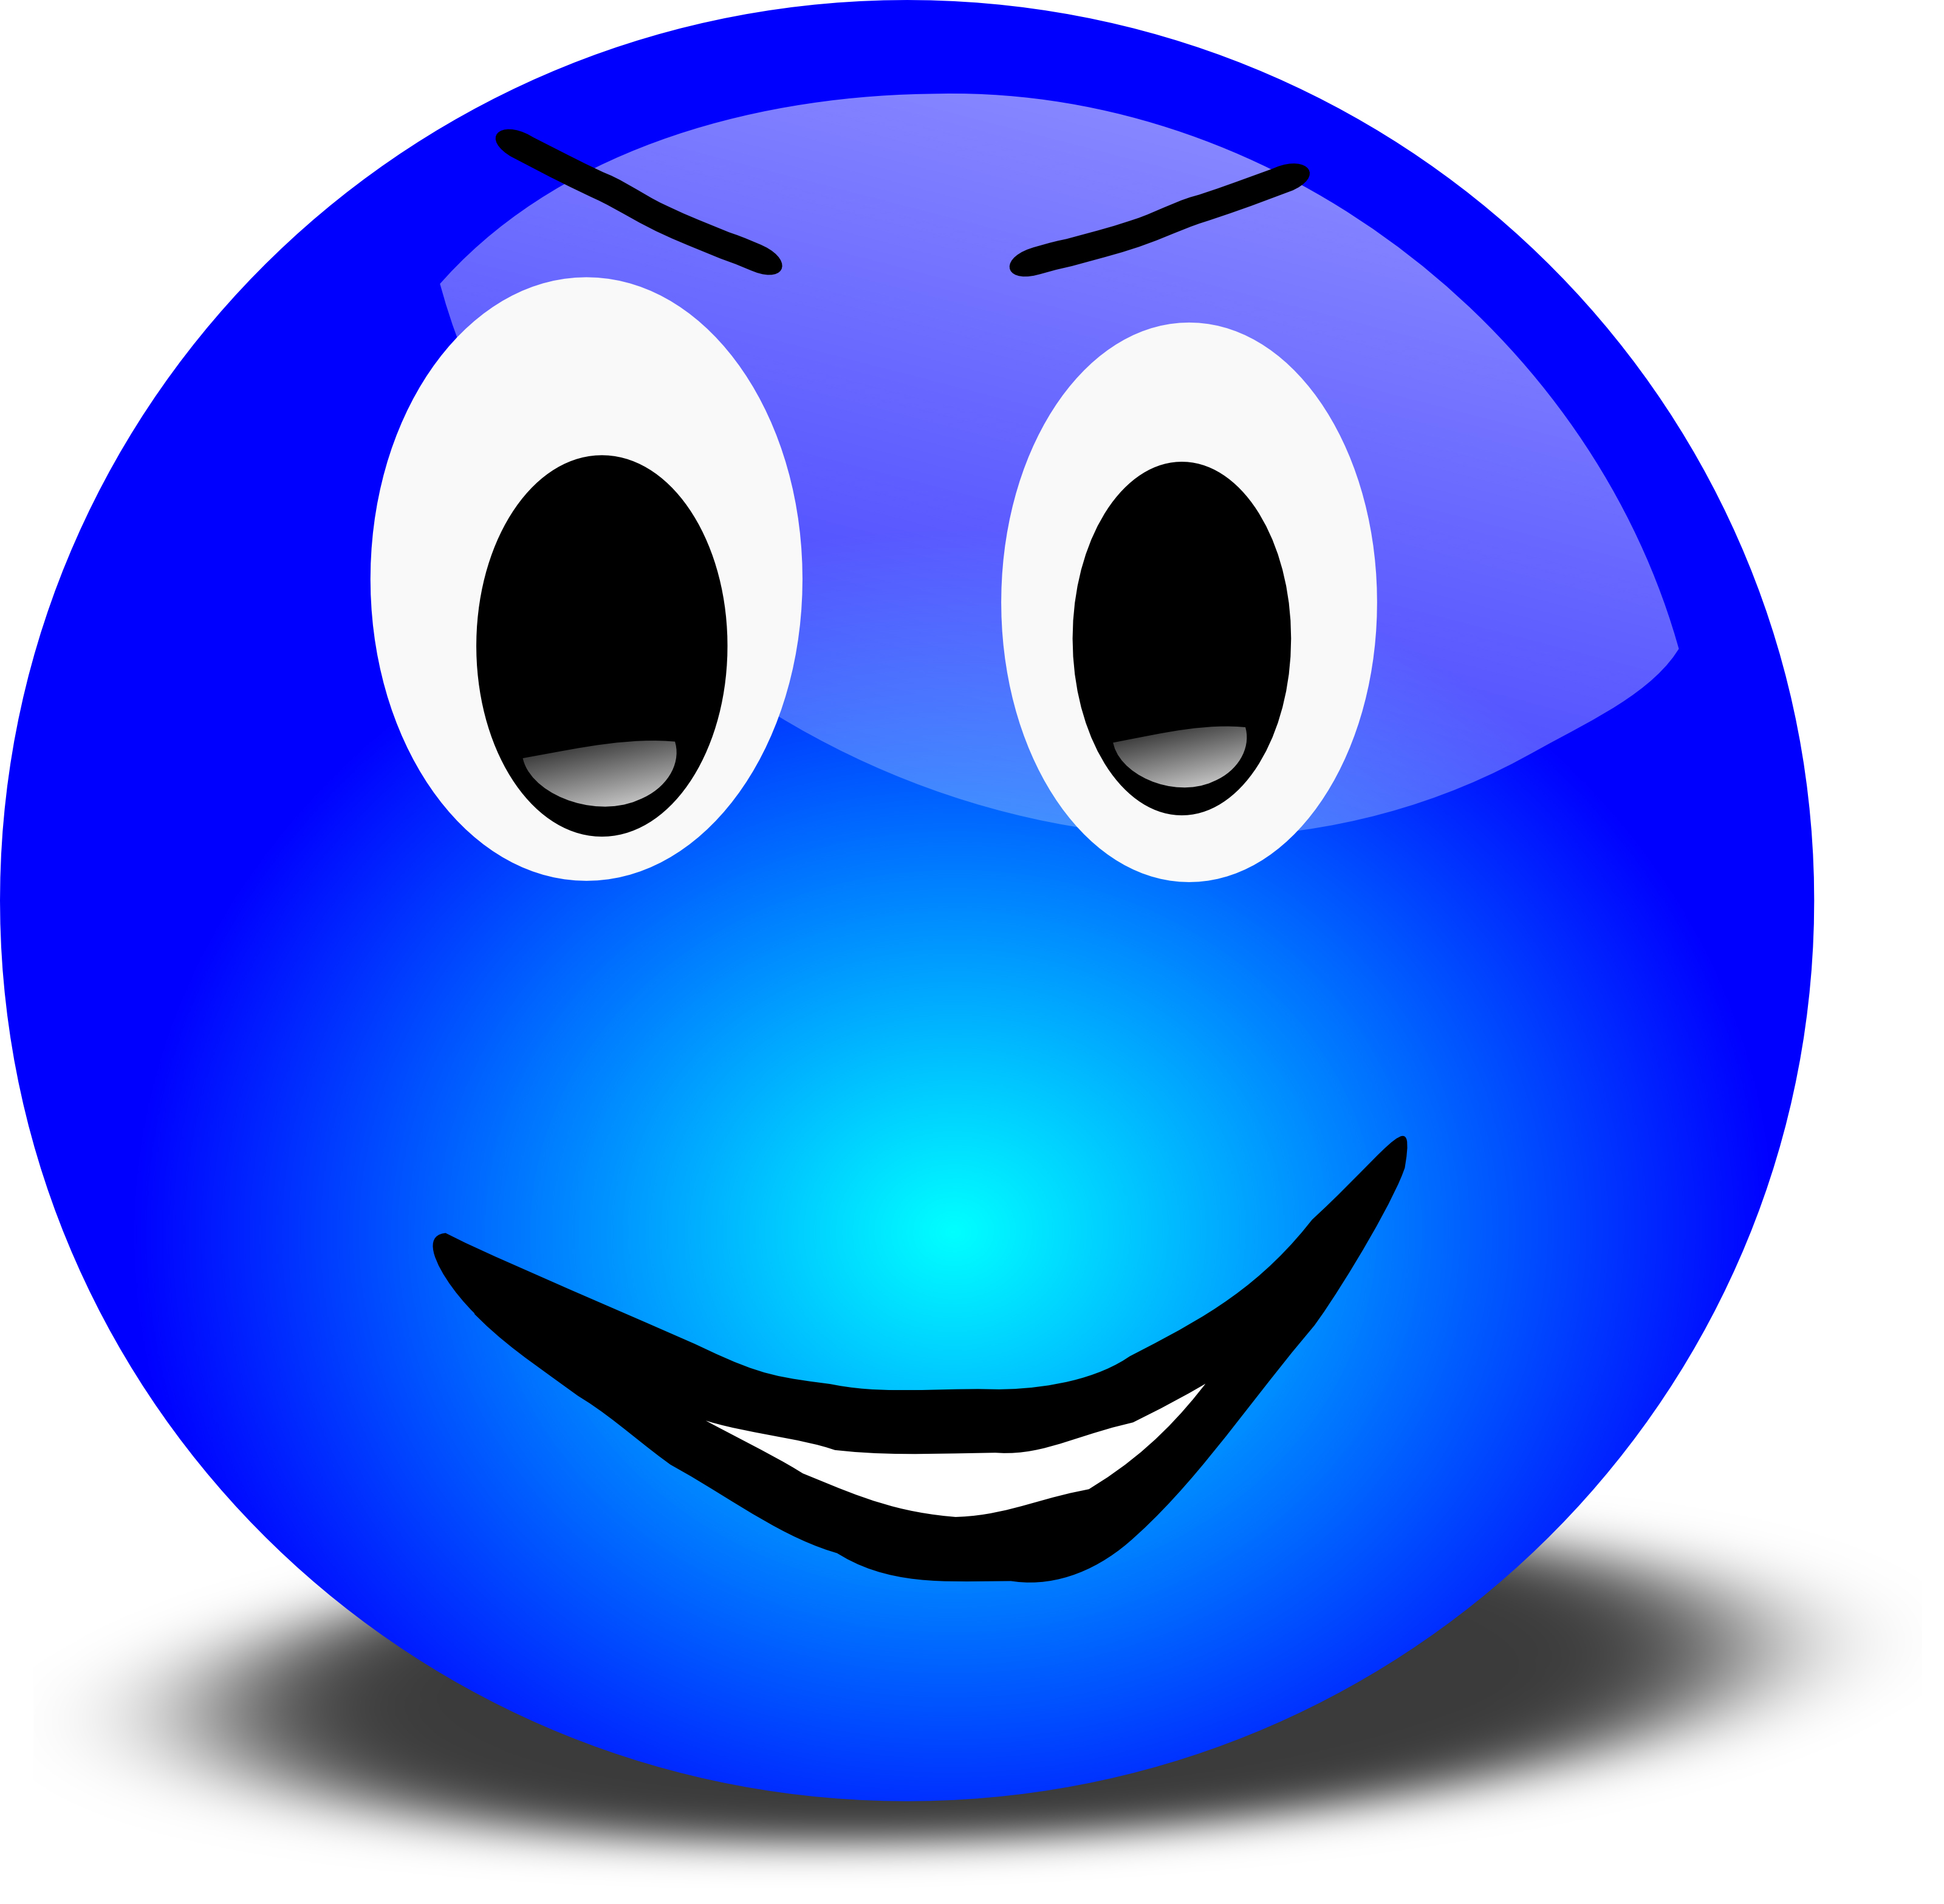 1000+ images about smiley | Smiley faces, Smiley ...